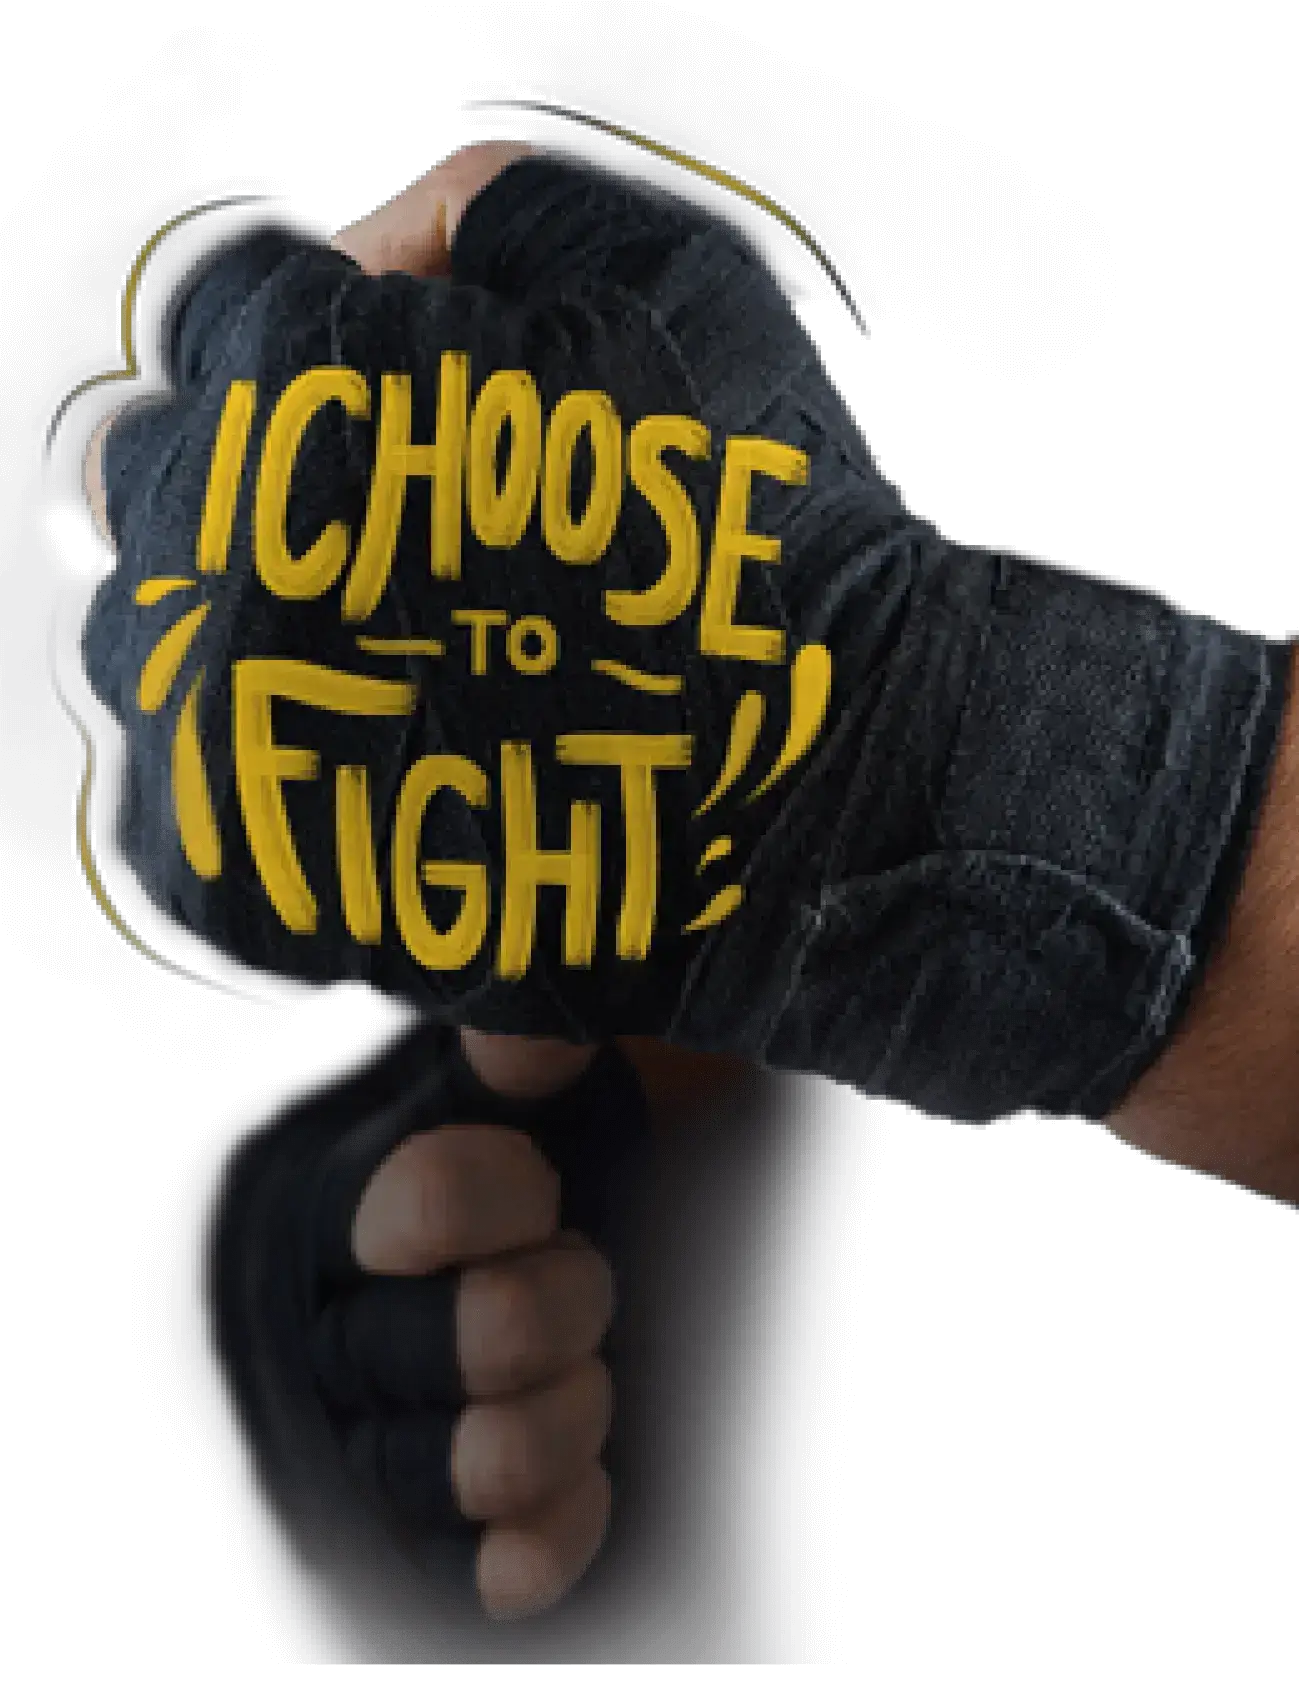 Clenched fist with boxing gloves. Text on boxing gloves reads "I choose to fight".